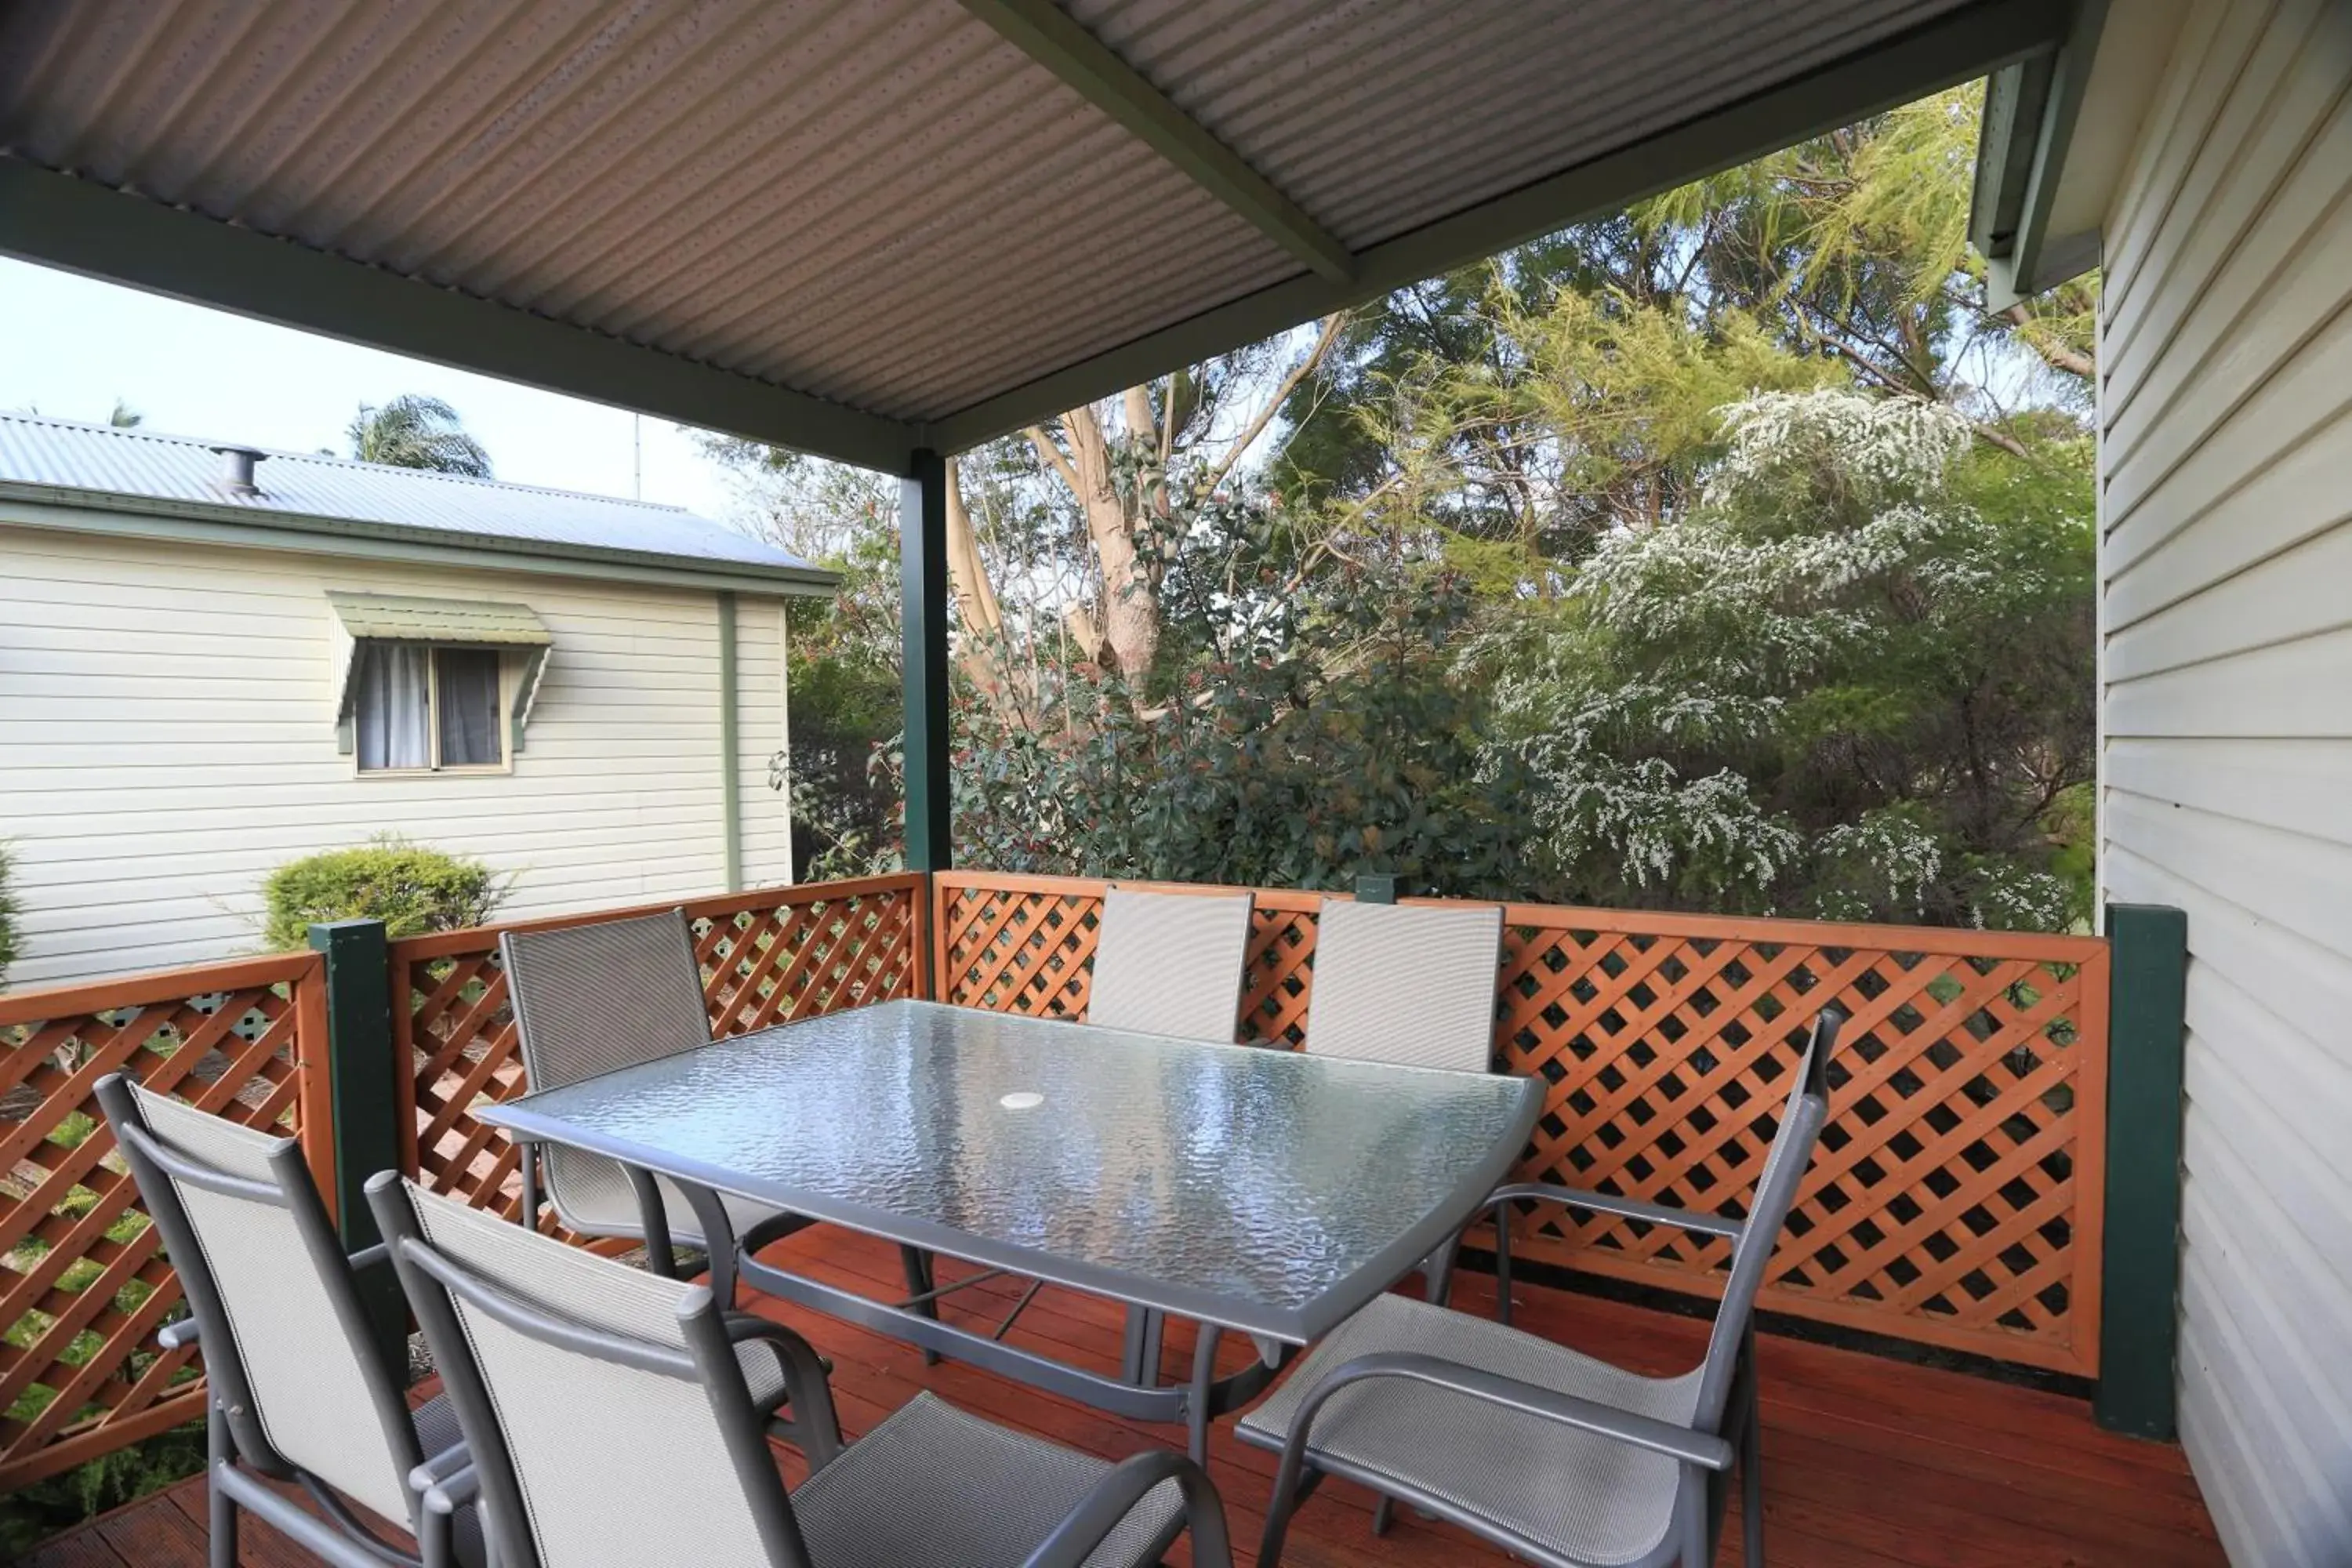 Standard 2 Bedroom Cabin in Discovery Parks - Perth Airport